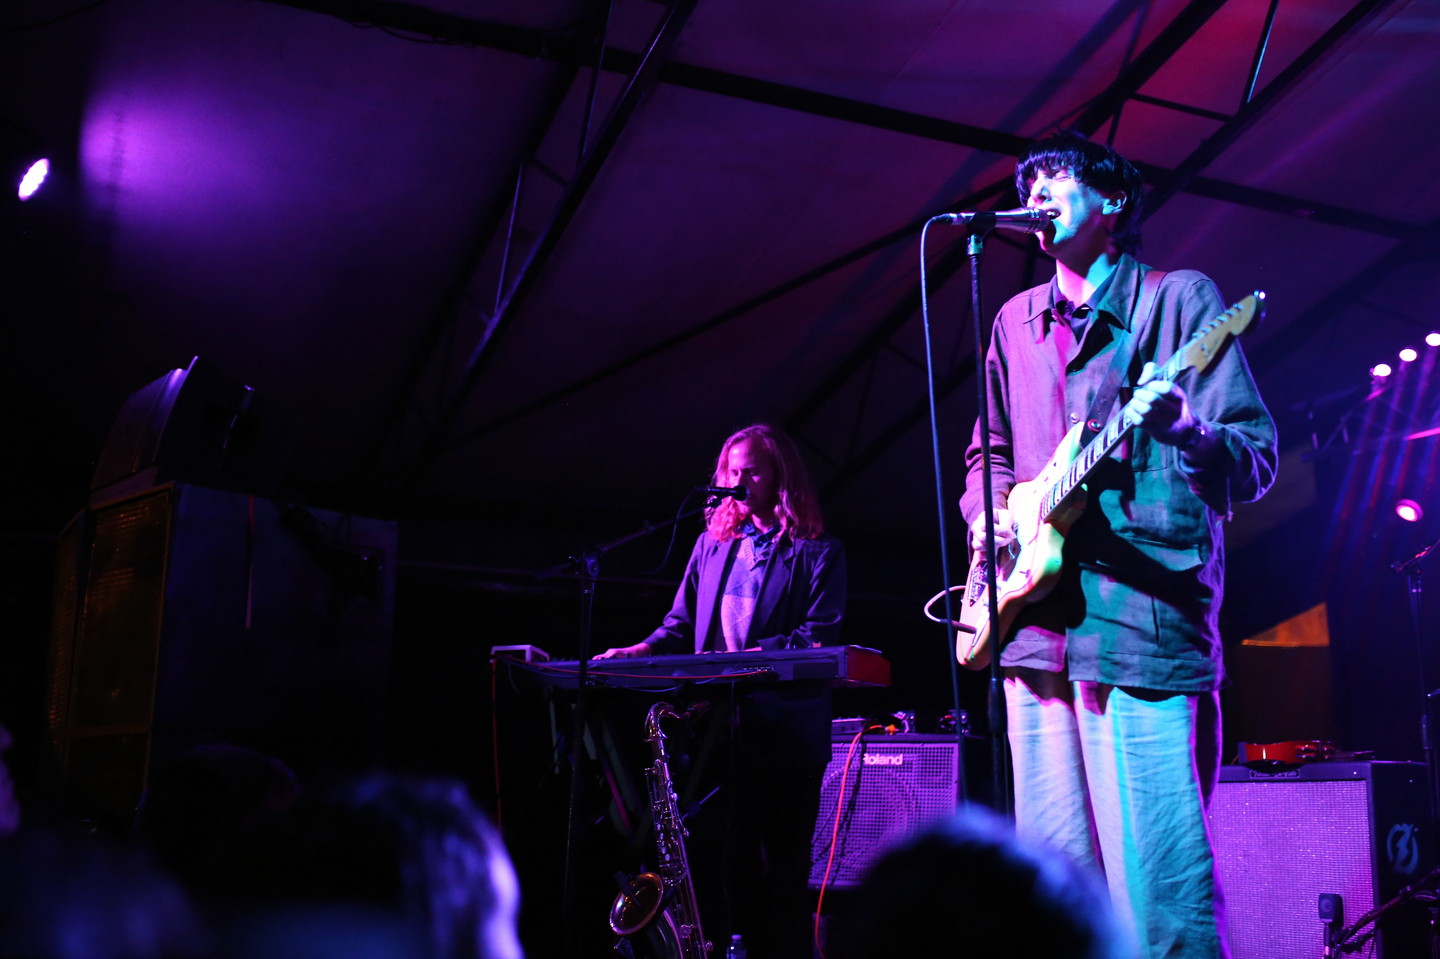 (L-R) Javier Morales and Bradford Cox of Deerhunter perform onstage at The Onion AV Club event at the Mohawk Outdoor.